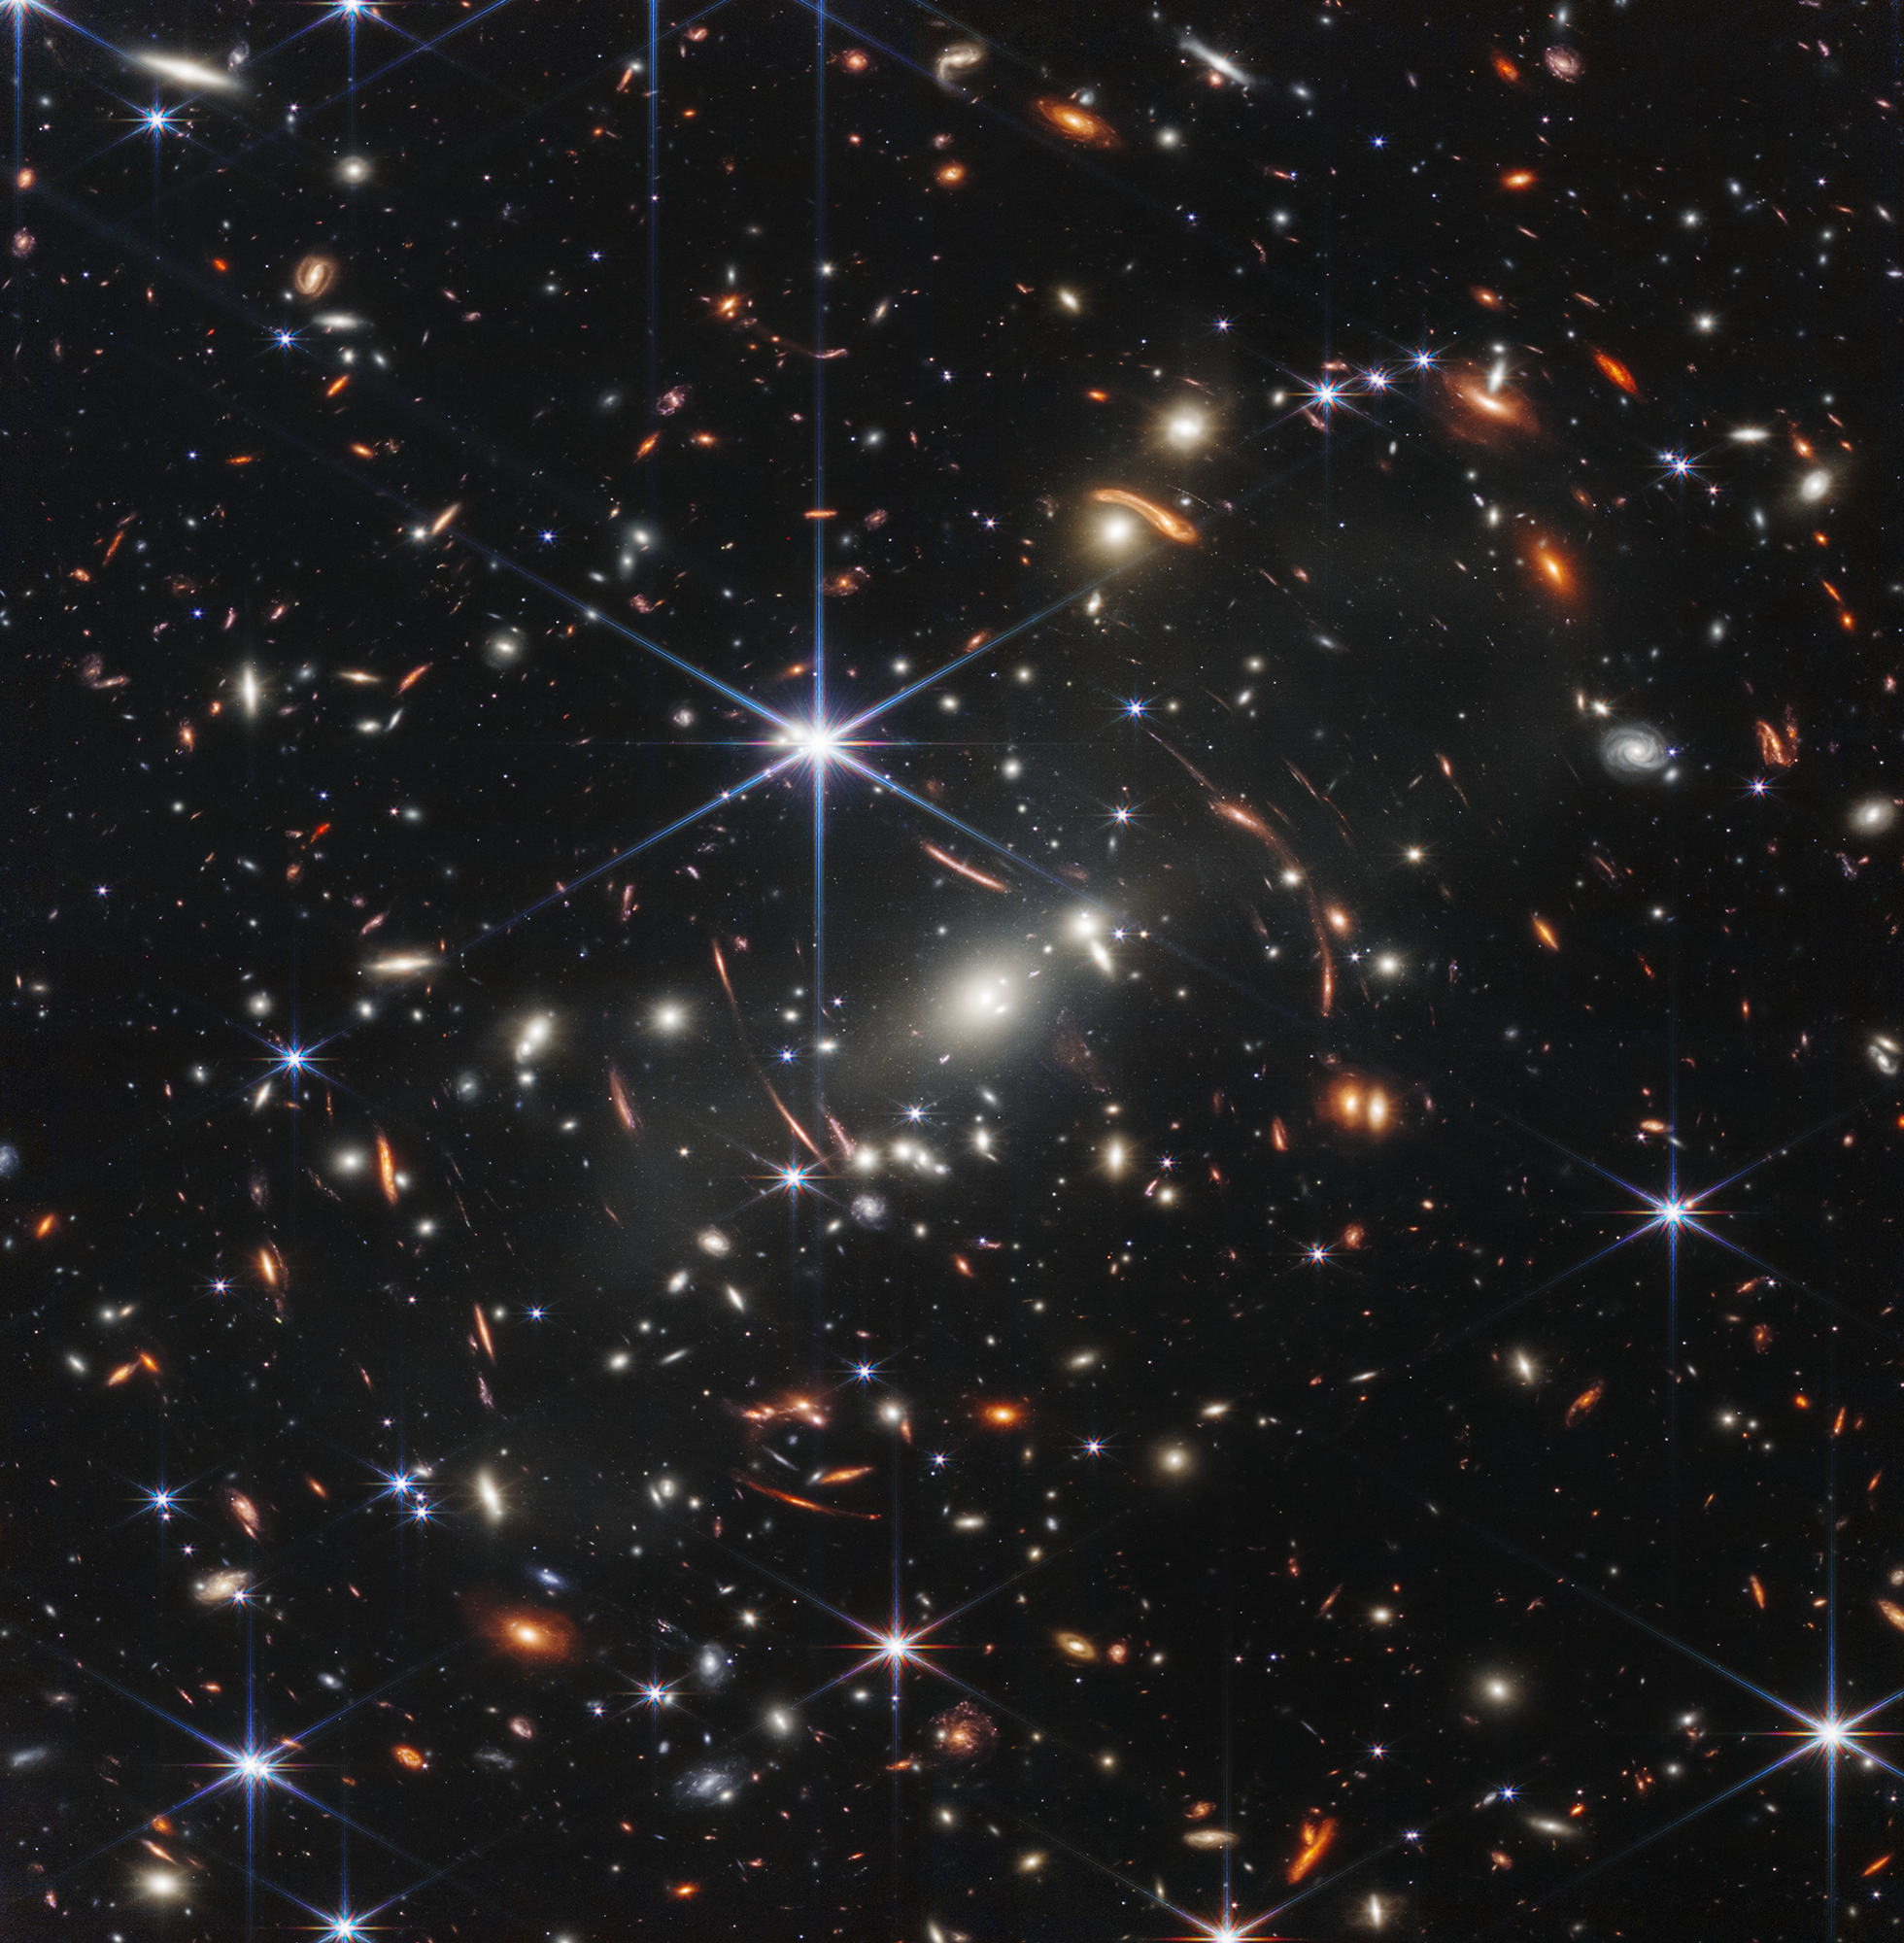 Shown is a colour photograph of black space sprinkled with bright, shining objects.